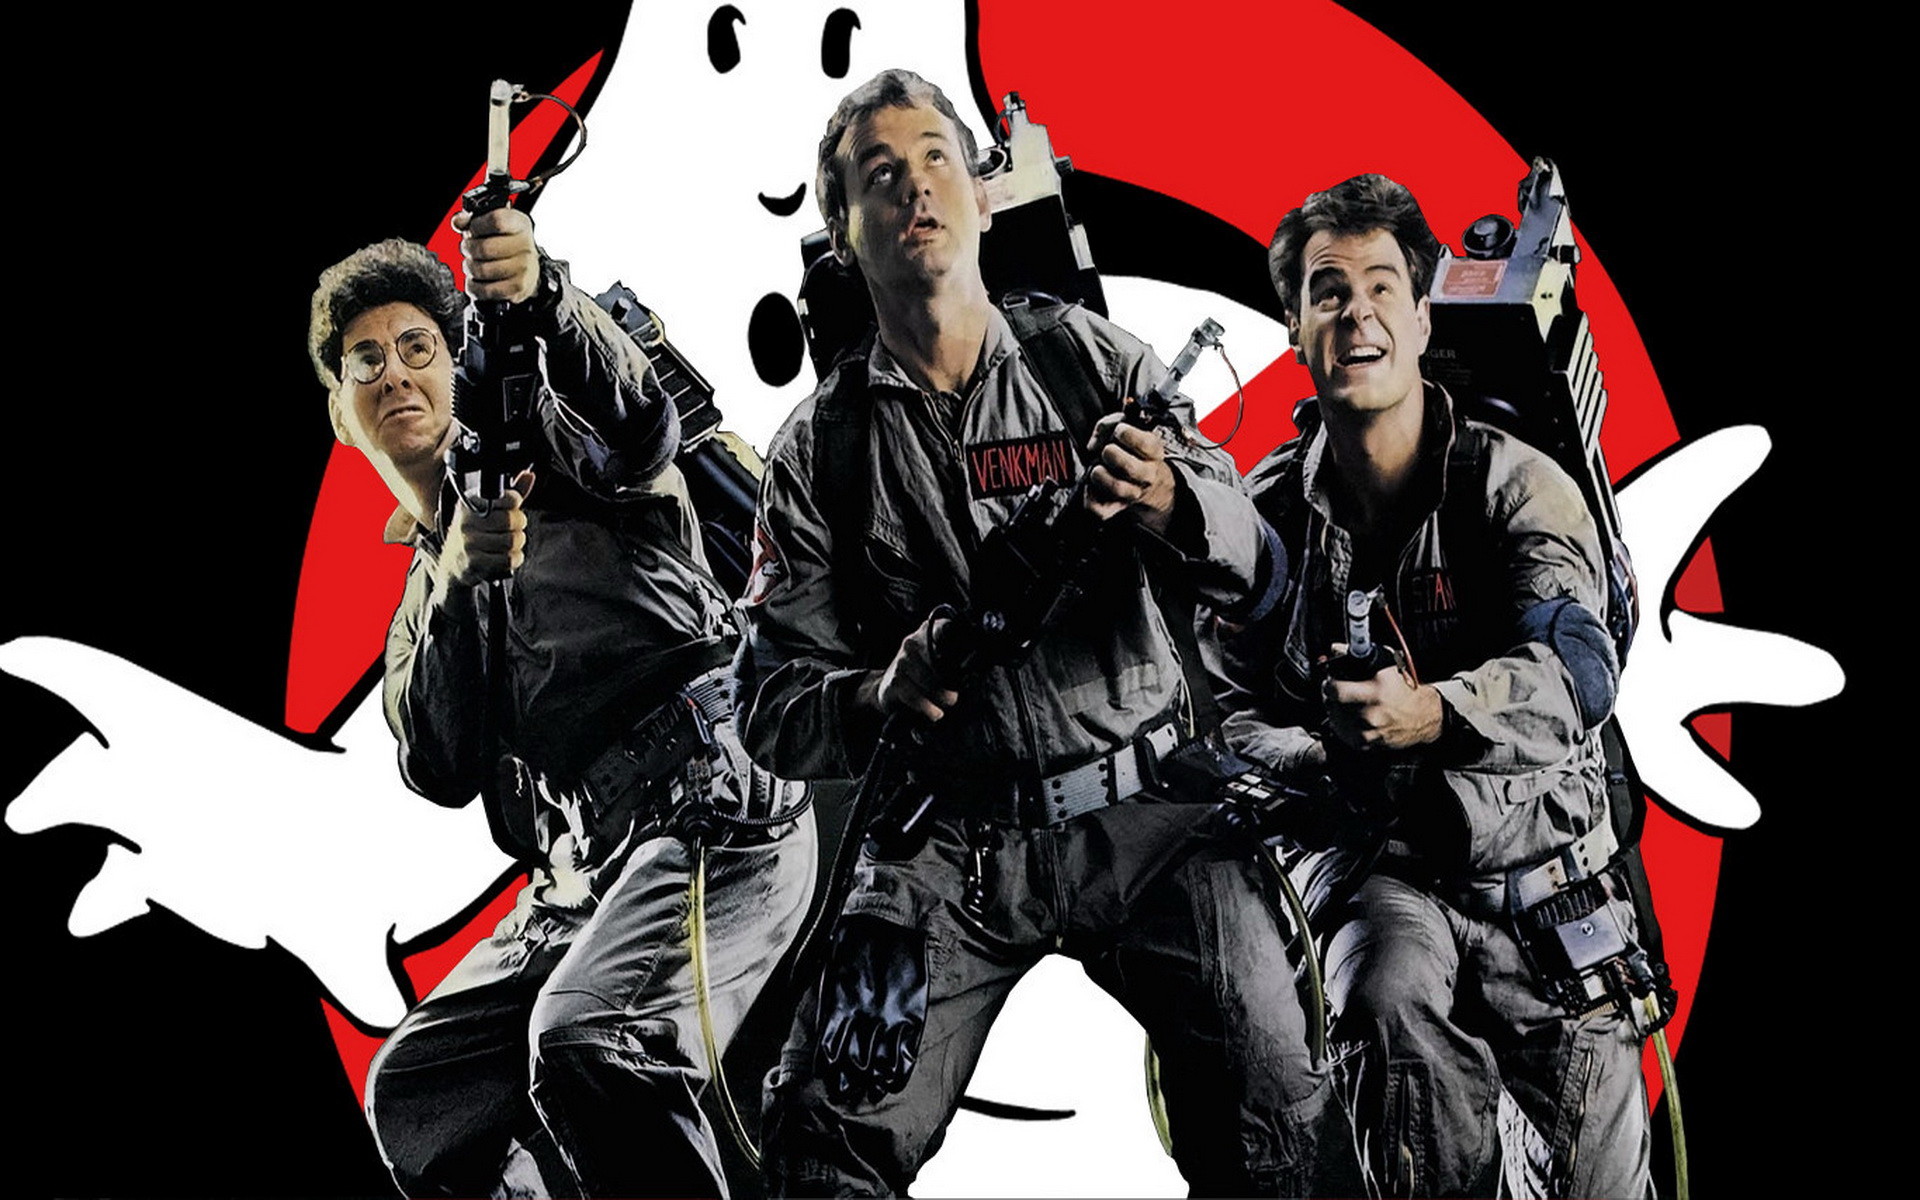 ghostbusters wallpaper,hip hop dance,music,performance,performing arts,event